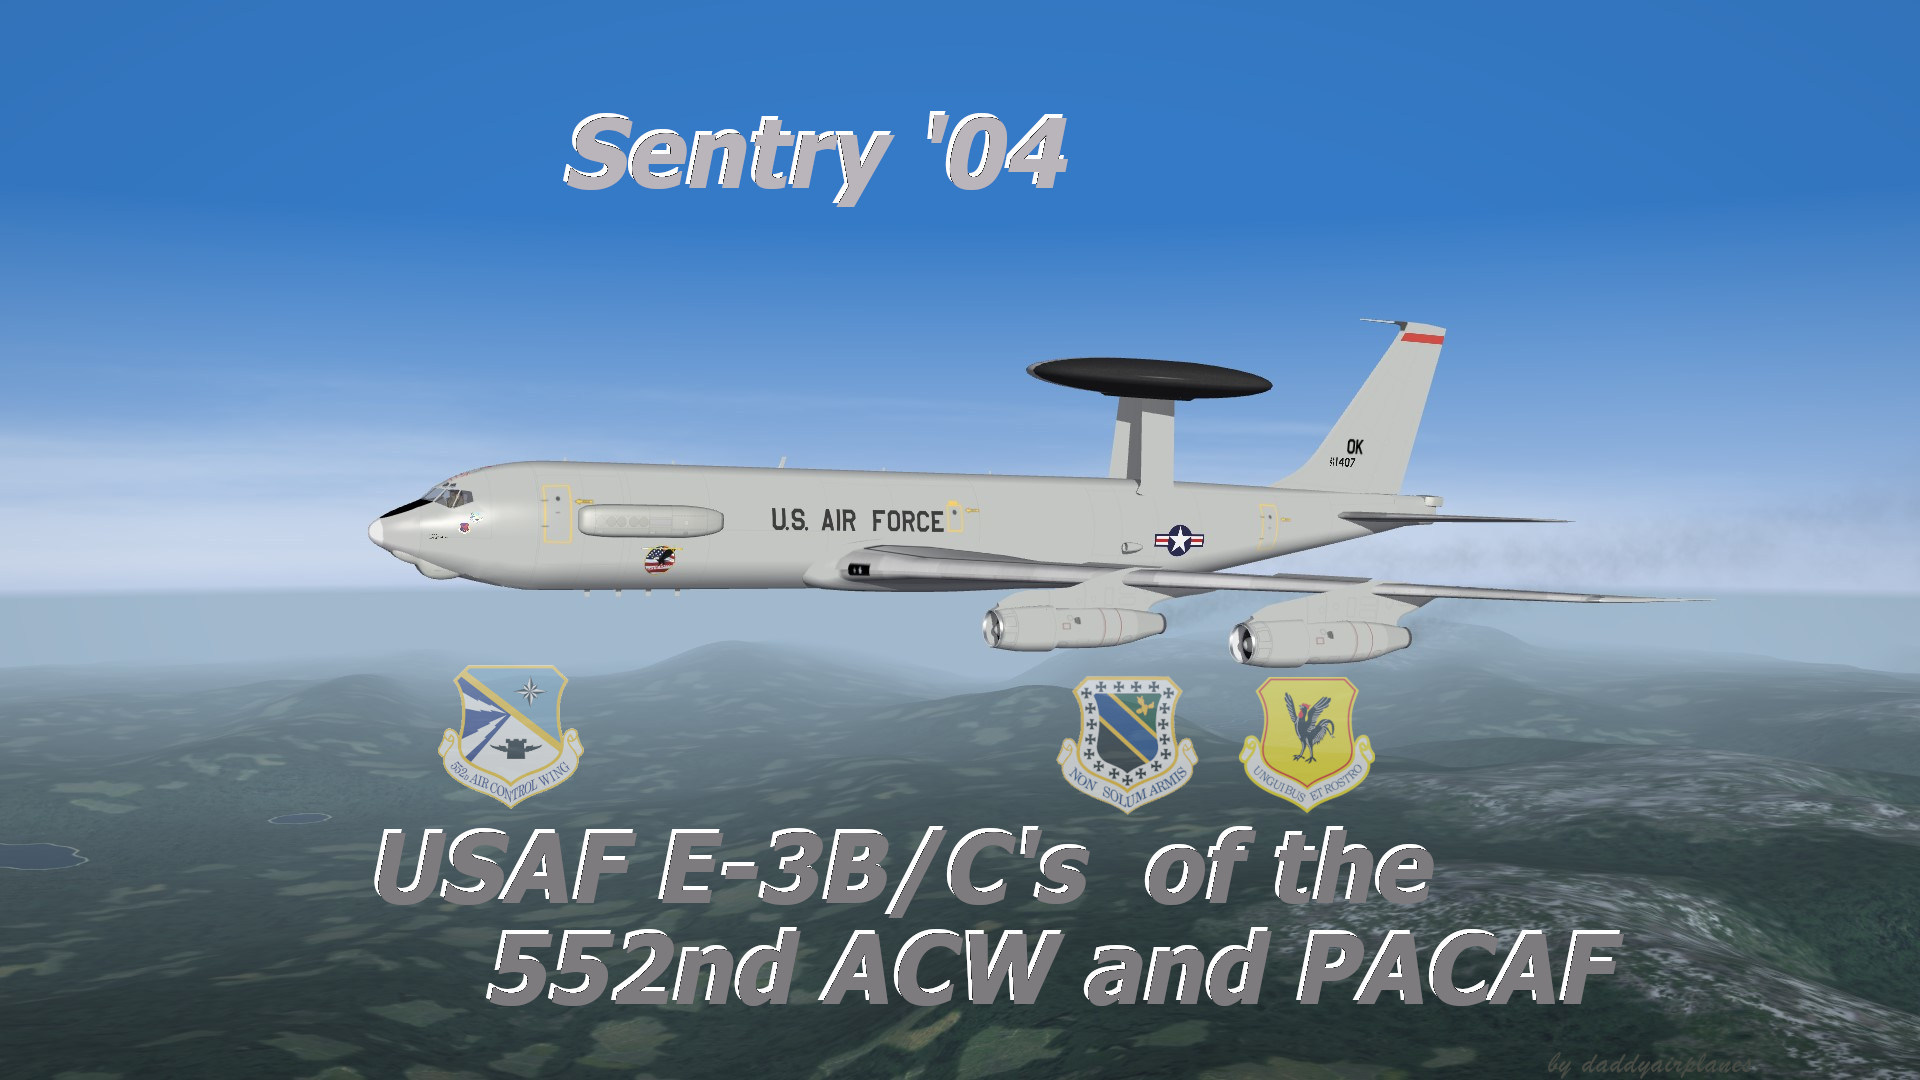 Sentry '04: USAF E-3B/C's of the 552nd ACW and PACAF